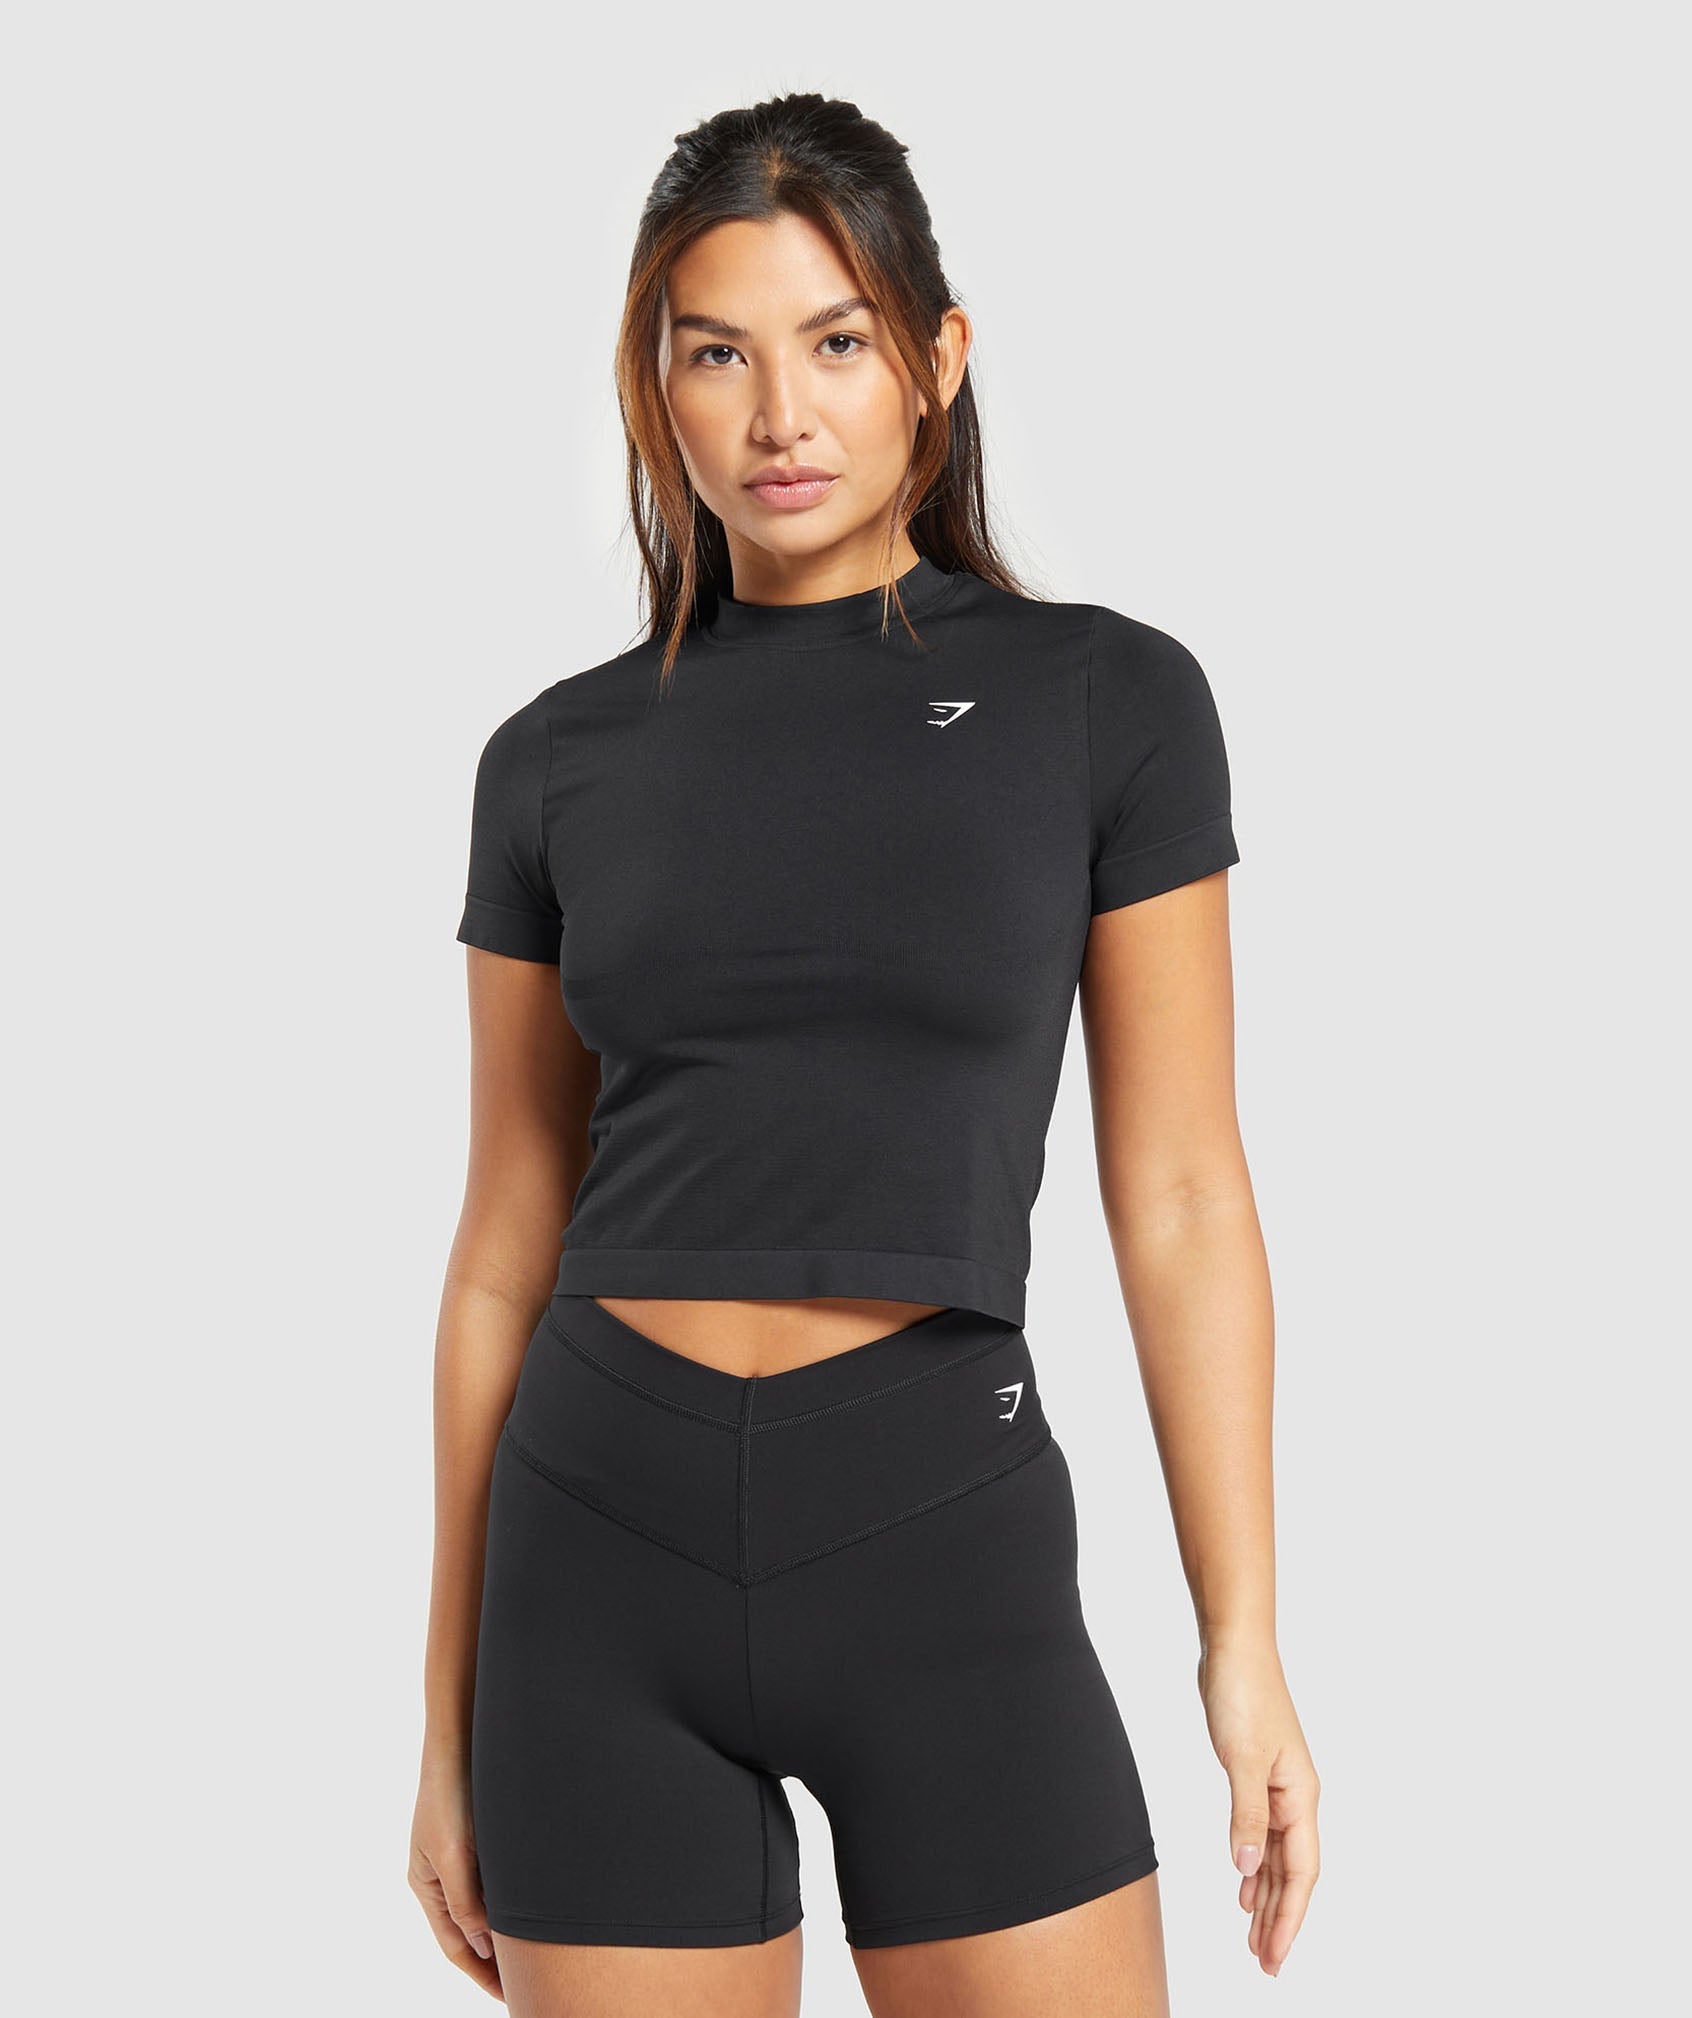 Everyday Seamless Tight Fit Tee in Black - view 1